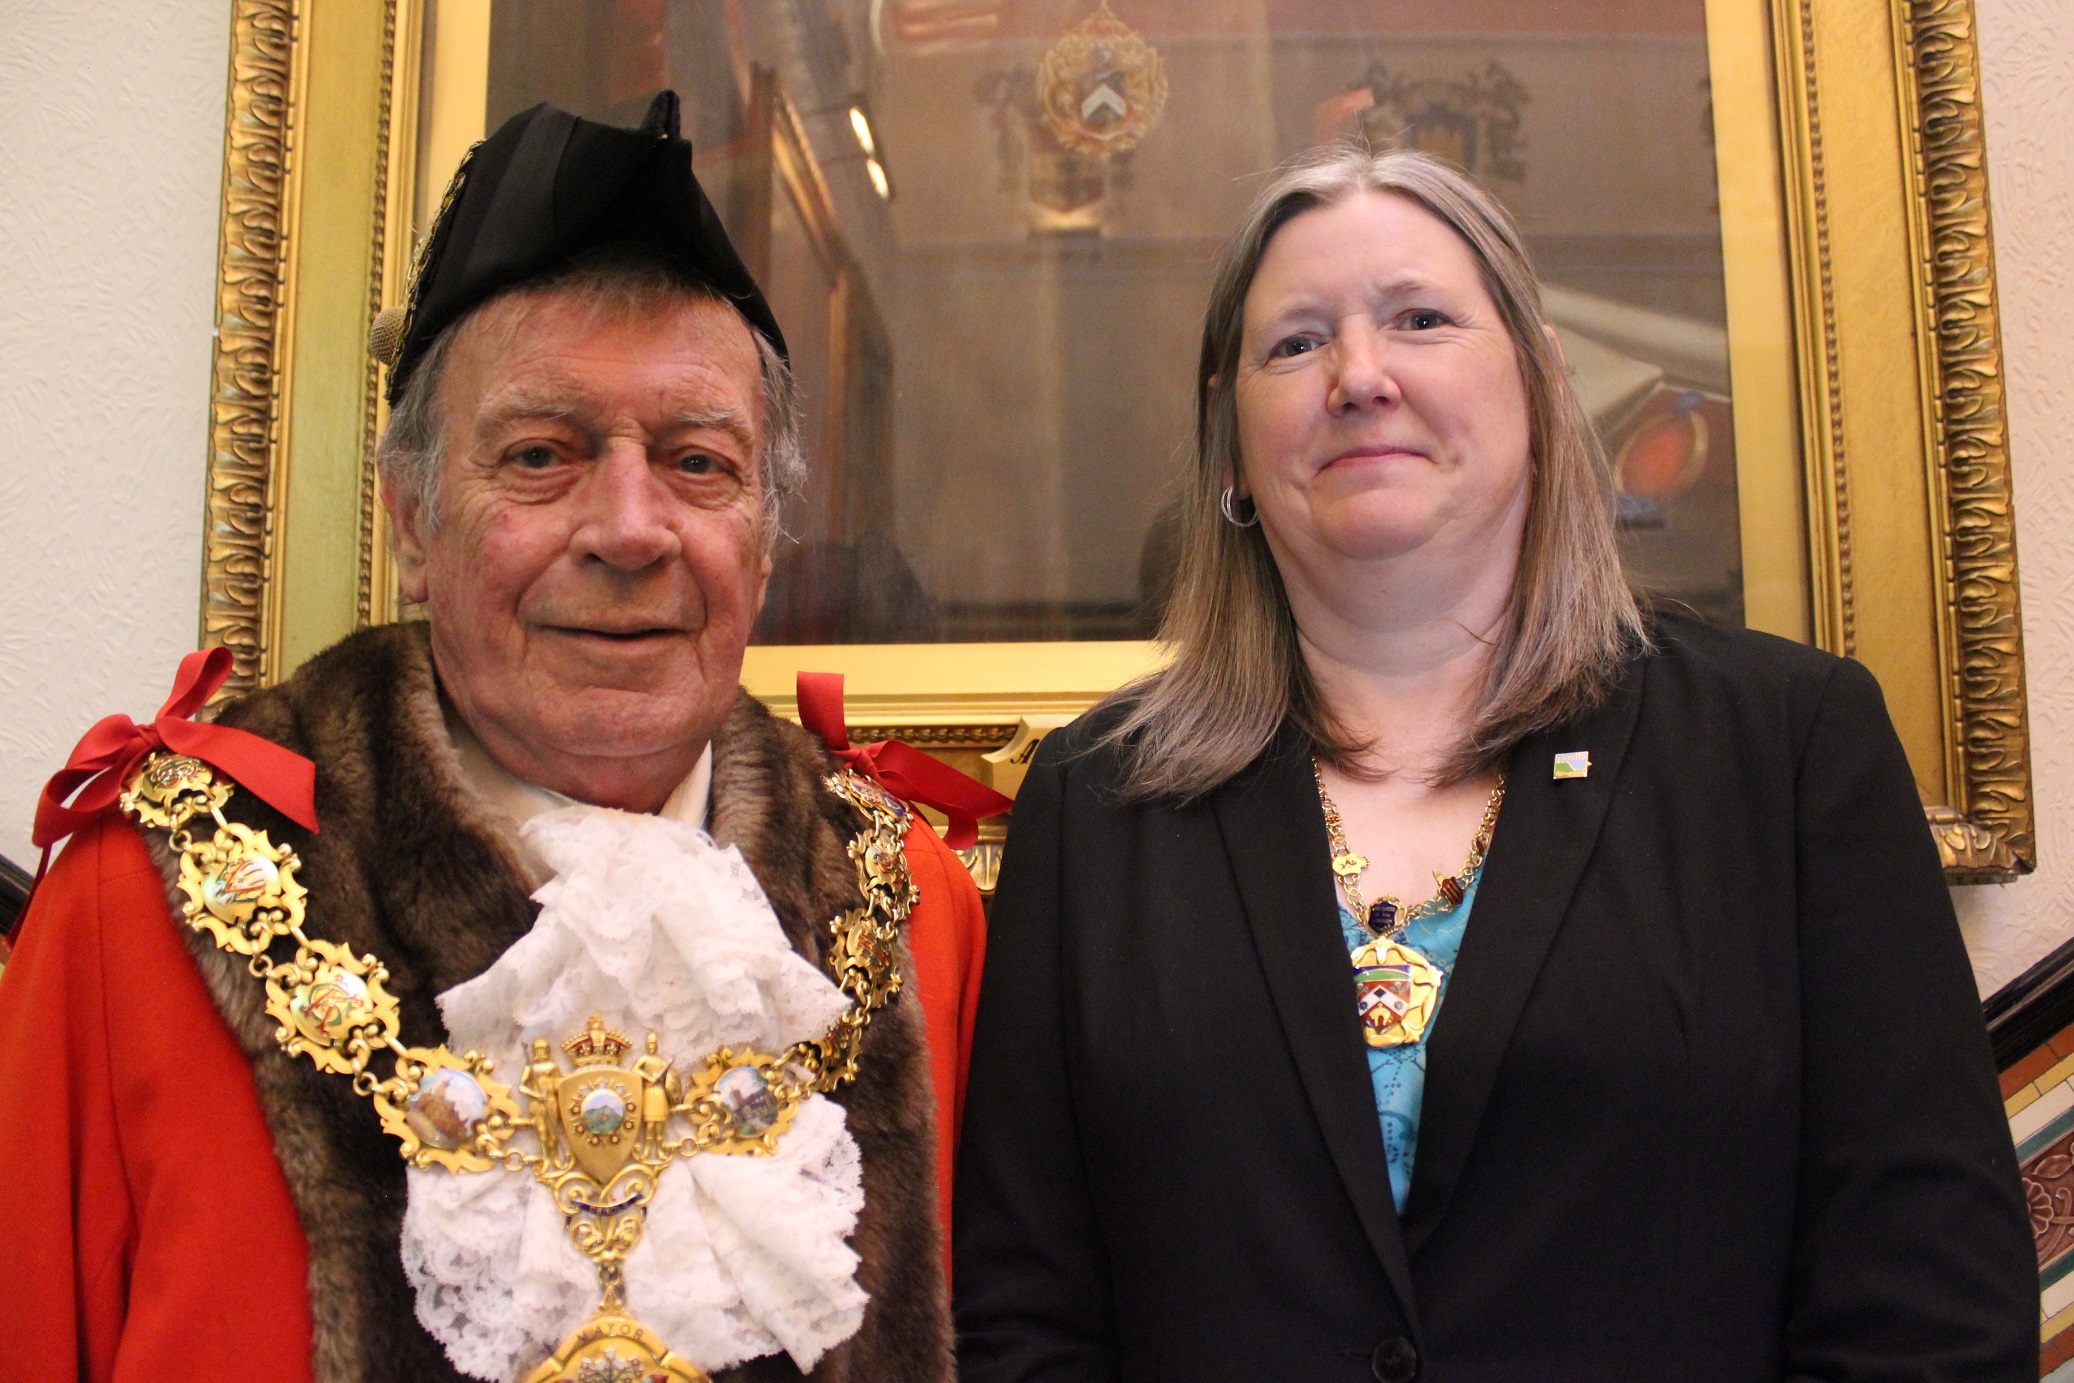 A new Mayor and Mayoress for Pendle